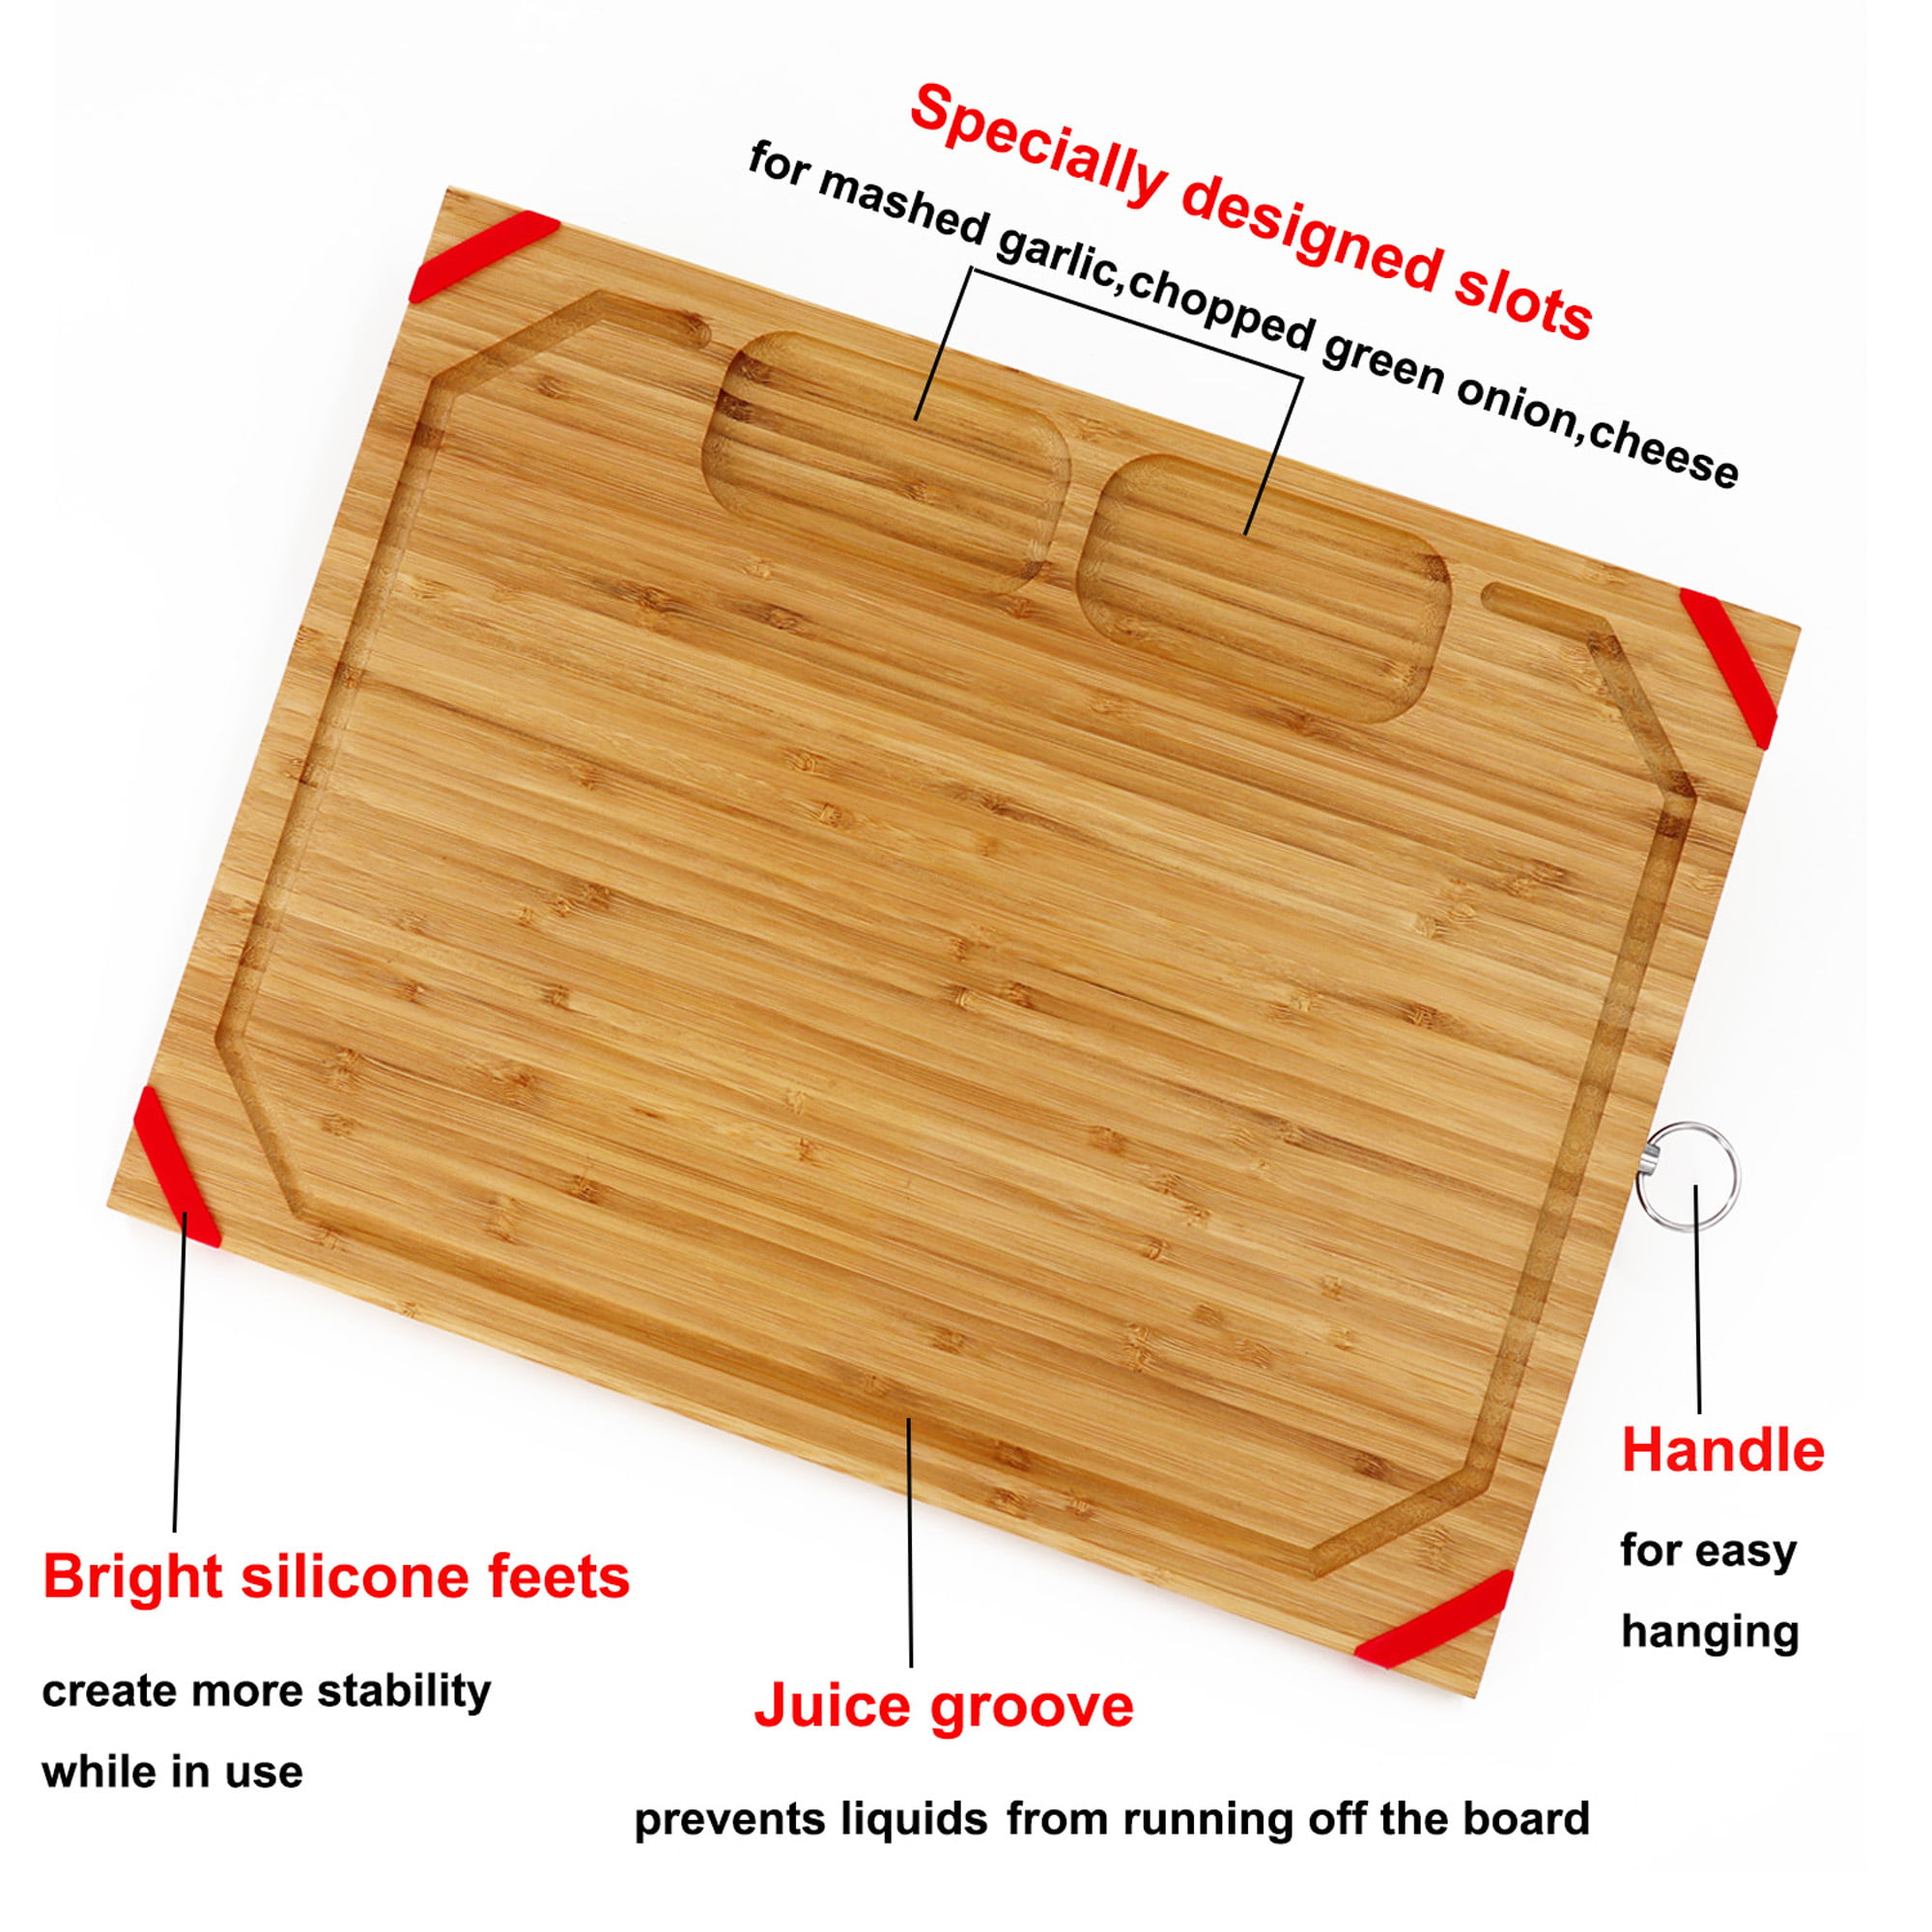 UST Bamboo Cutting Board with Eco-Friendly Construction, Moisture  Resistance and Space Saving Size for Camping, Hiking, Emergency and Outdoor  Survival